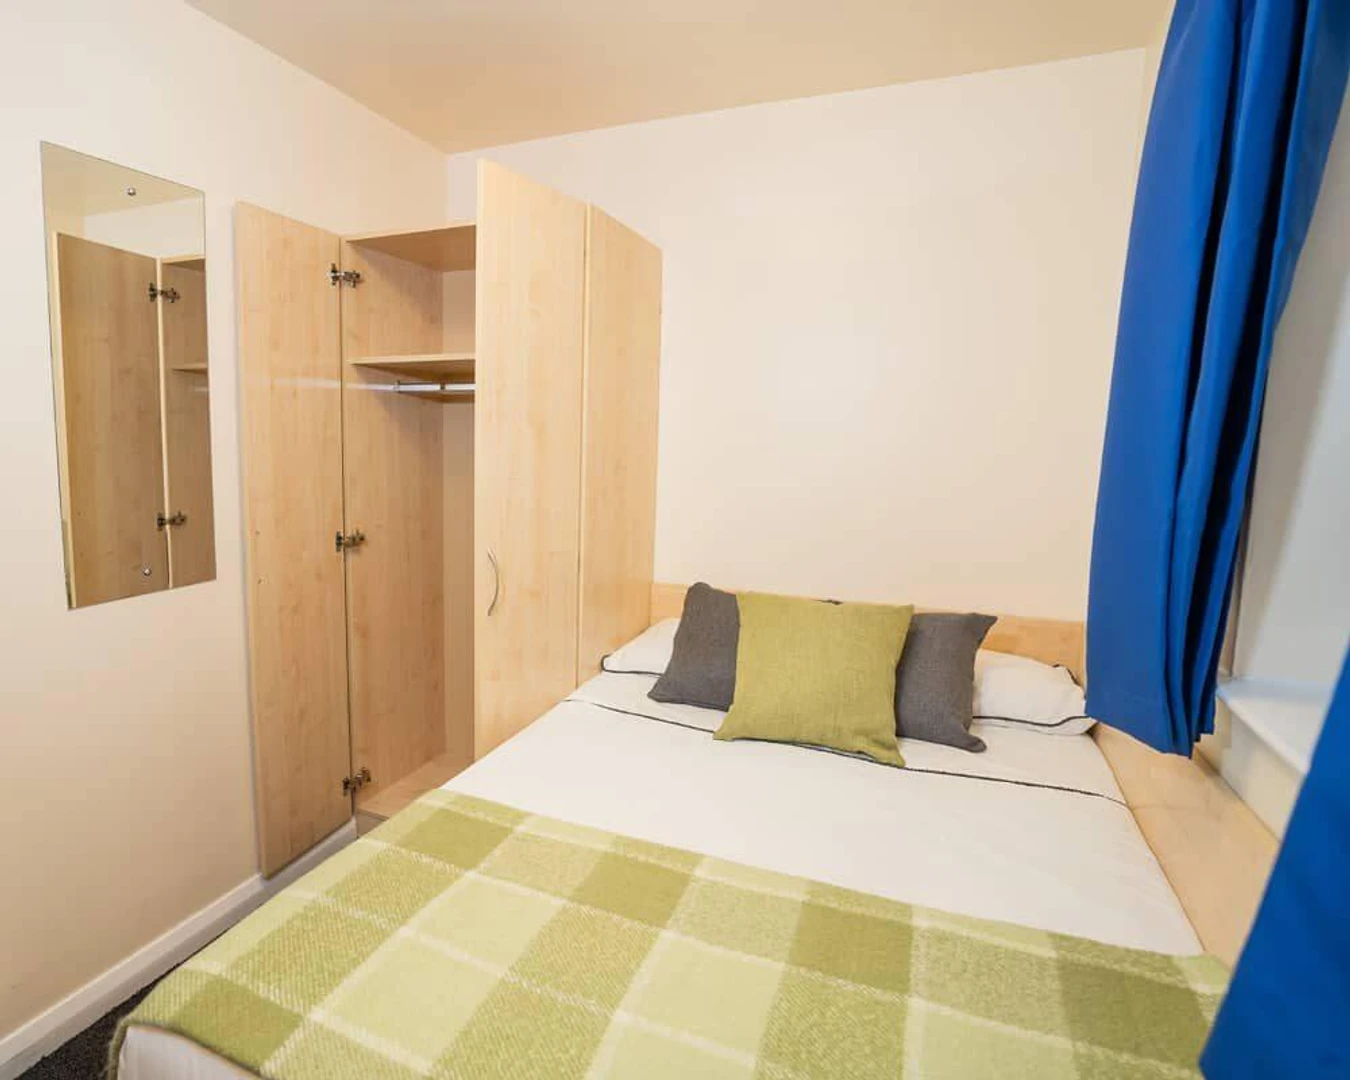 Room for rent in a shared flat in Birmingham